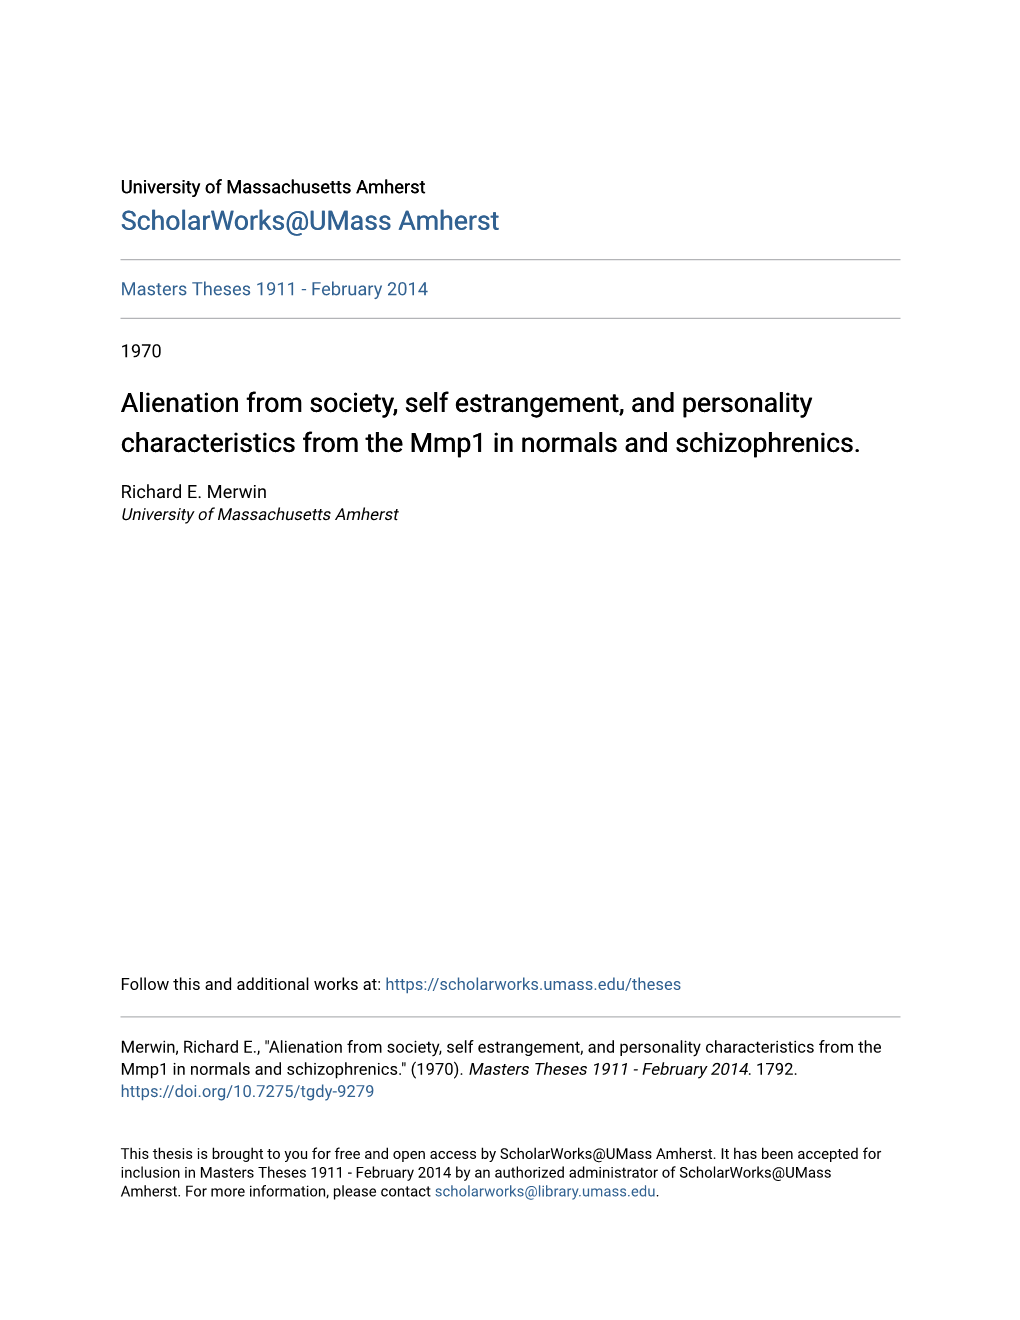 Alienation from Society, Self Estrangement, and Personality Characteristics from the Mmp1 in Normals and Schizophrenics